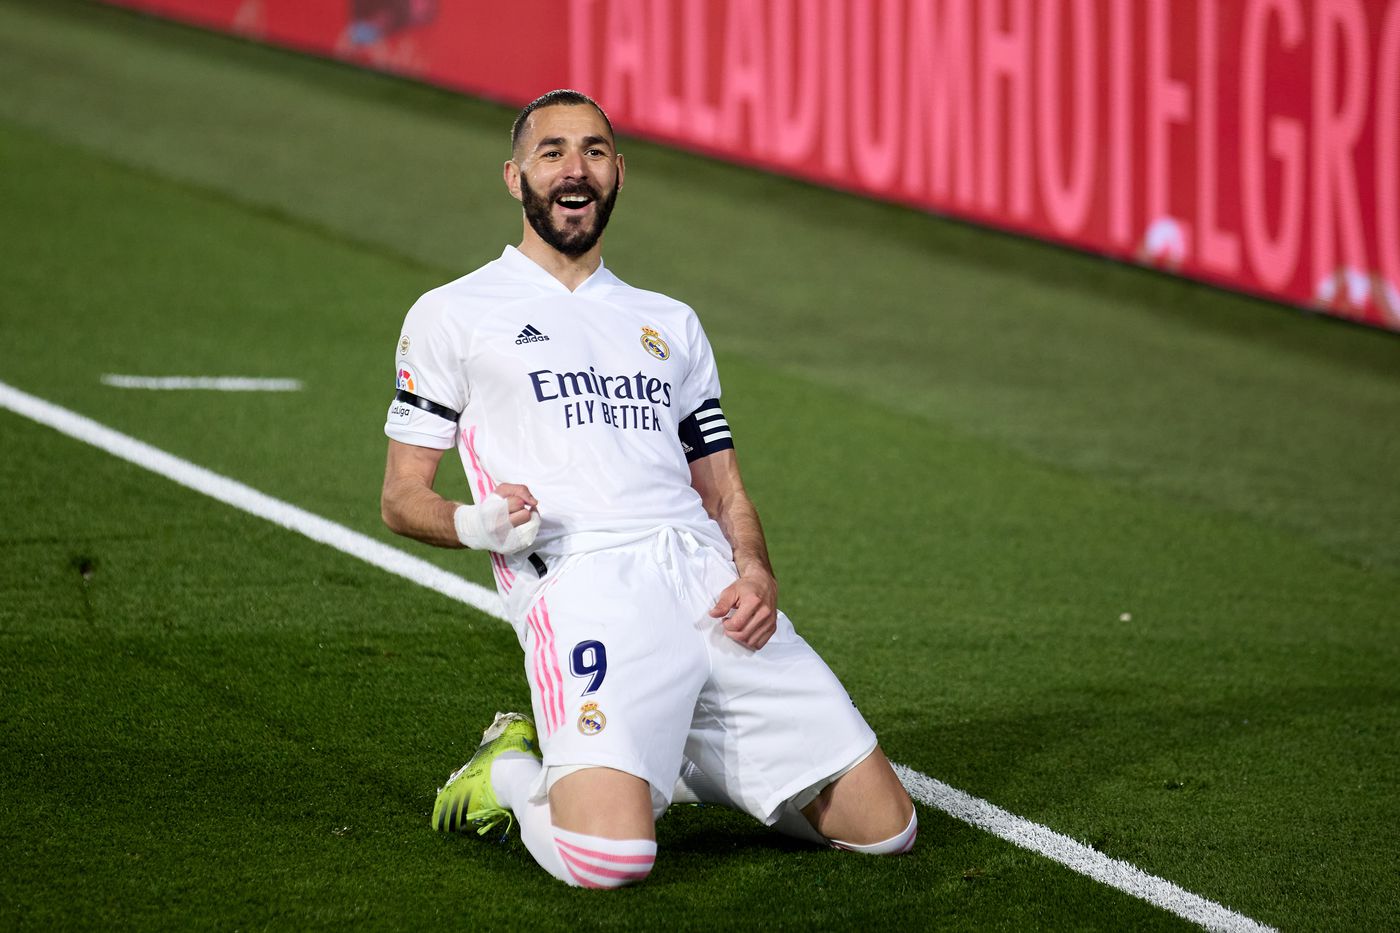 Karim Benzema set to sign contract extension with Real Madrid until 2023 -report